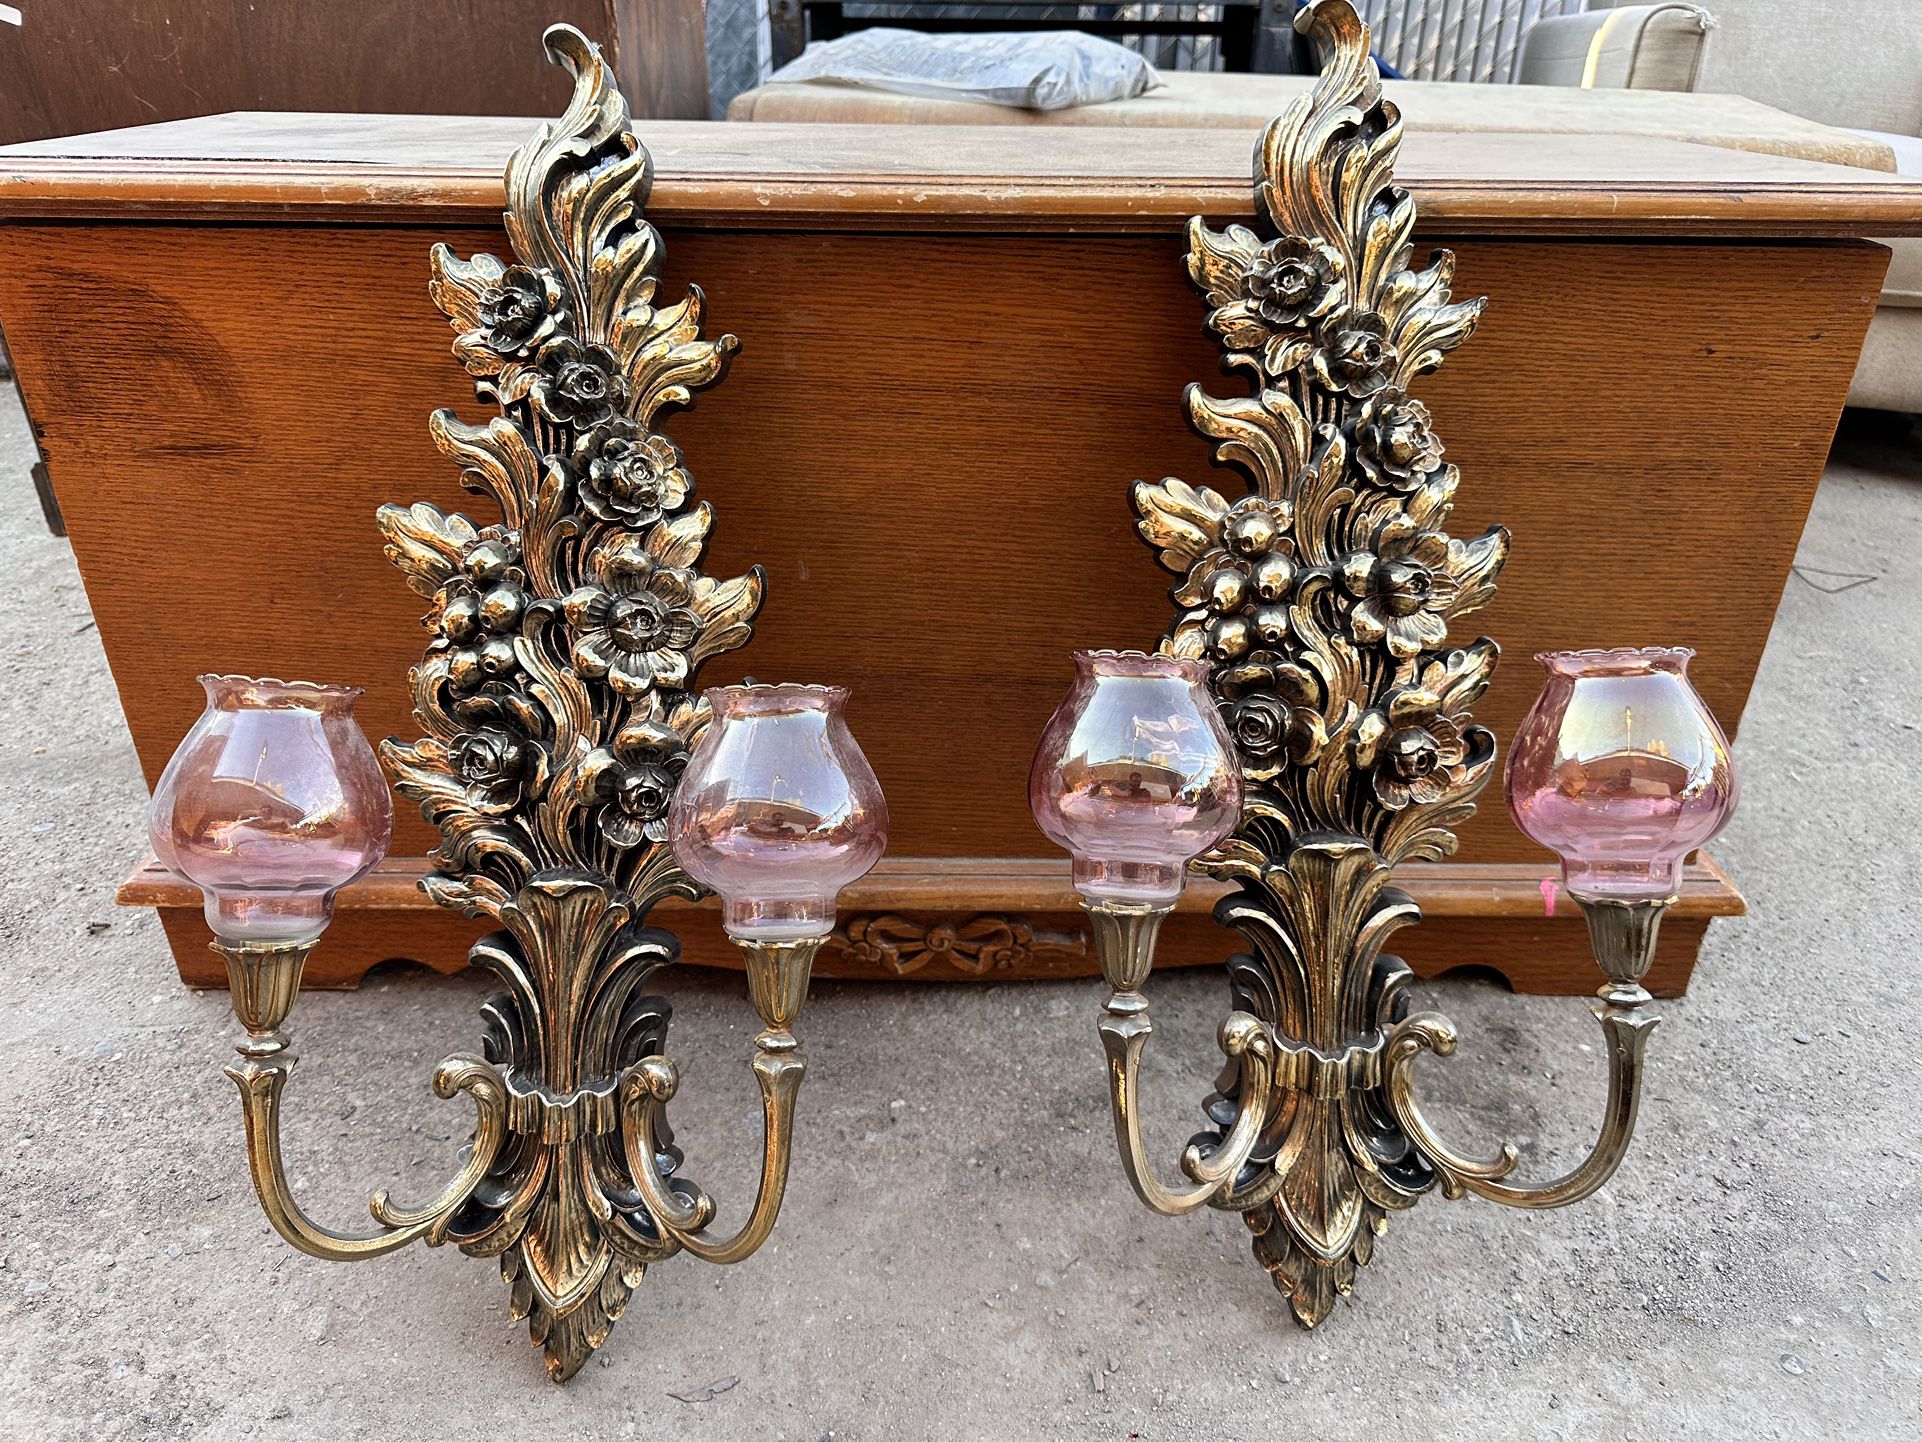 1970s vintage gold Syroco wall sconce (HUGE candle sconces!)